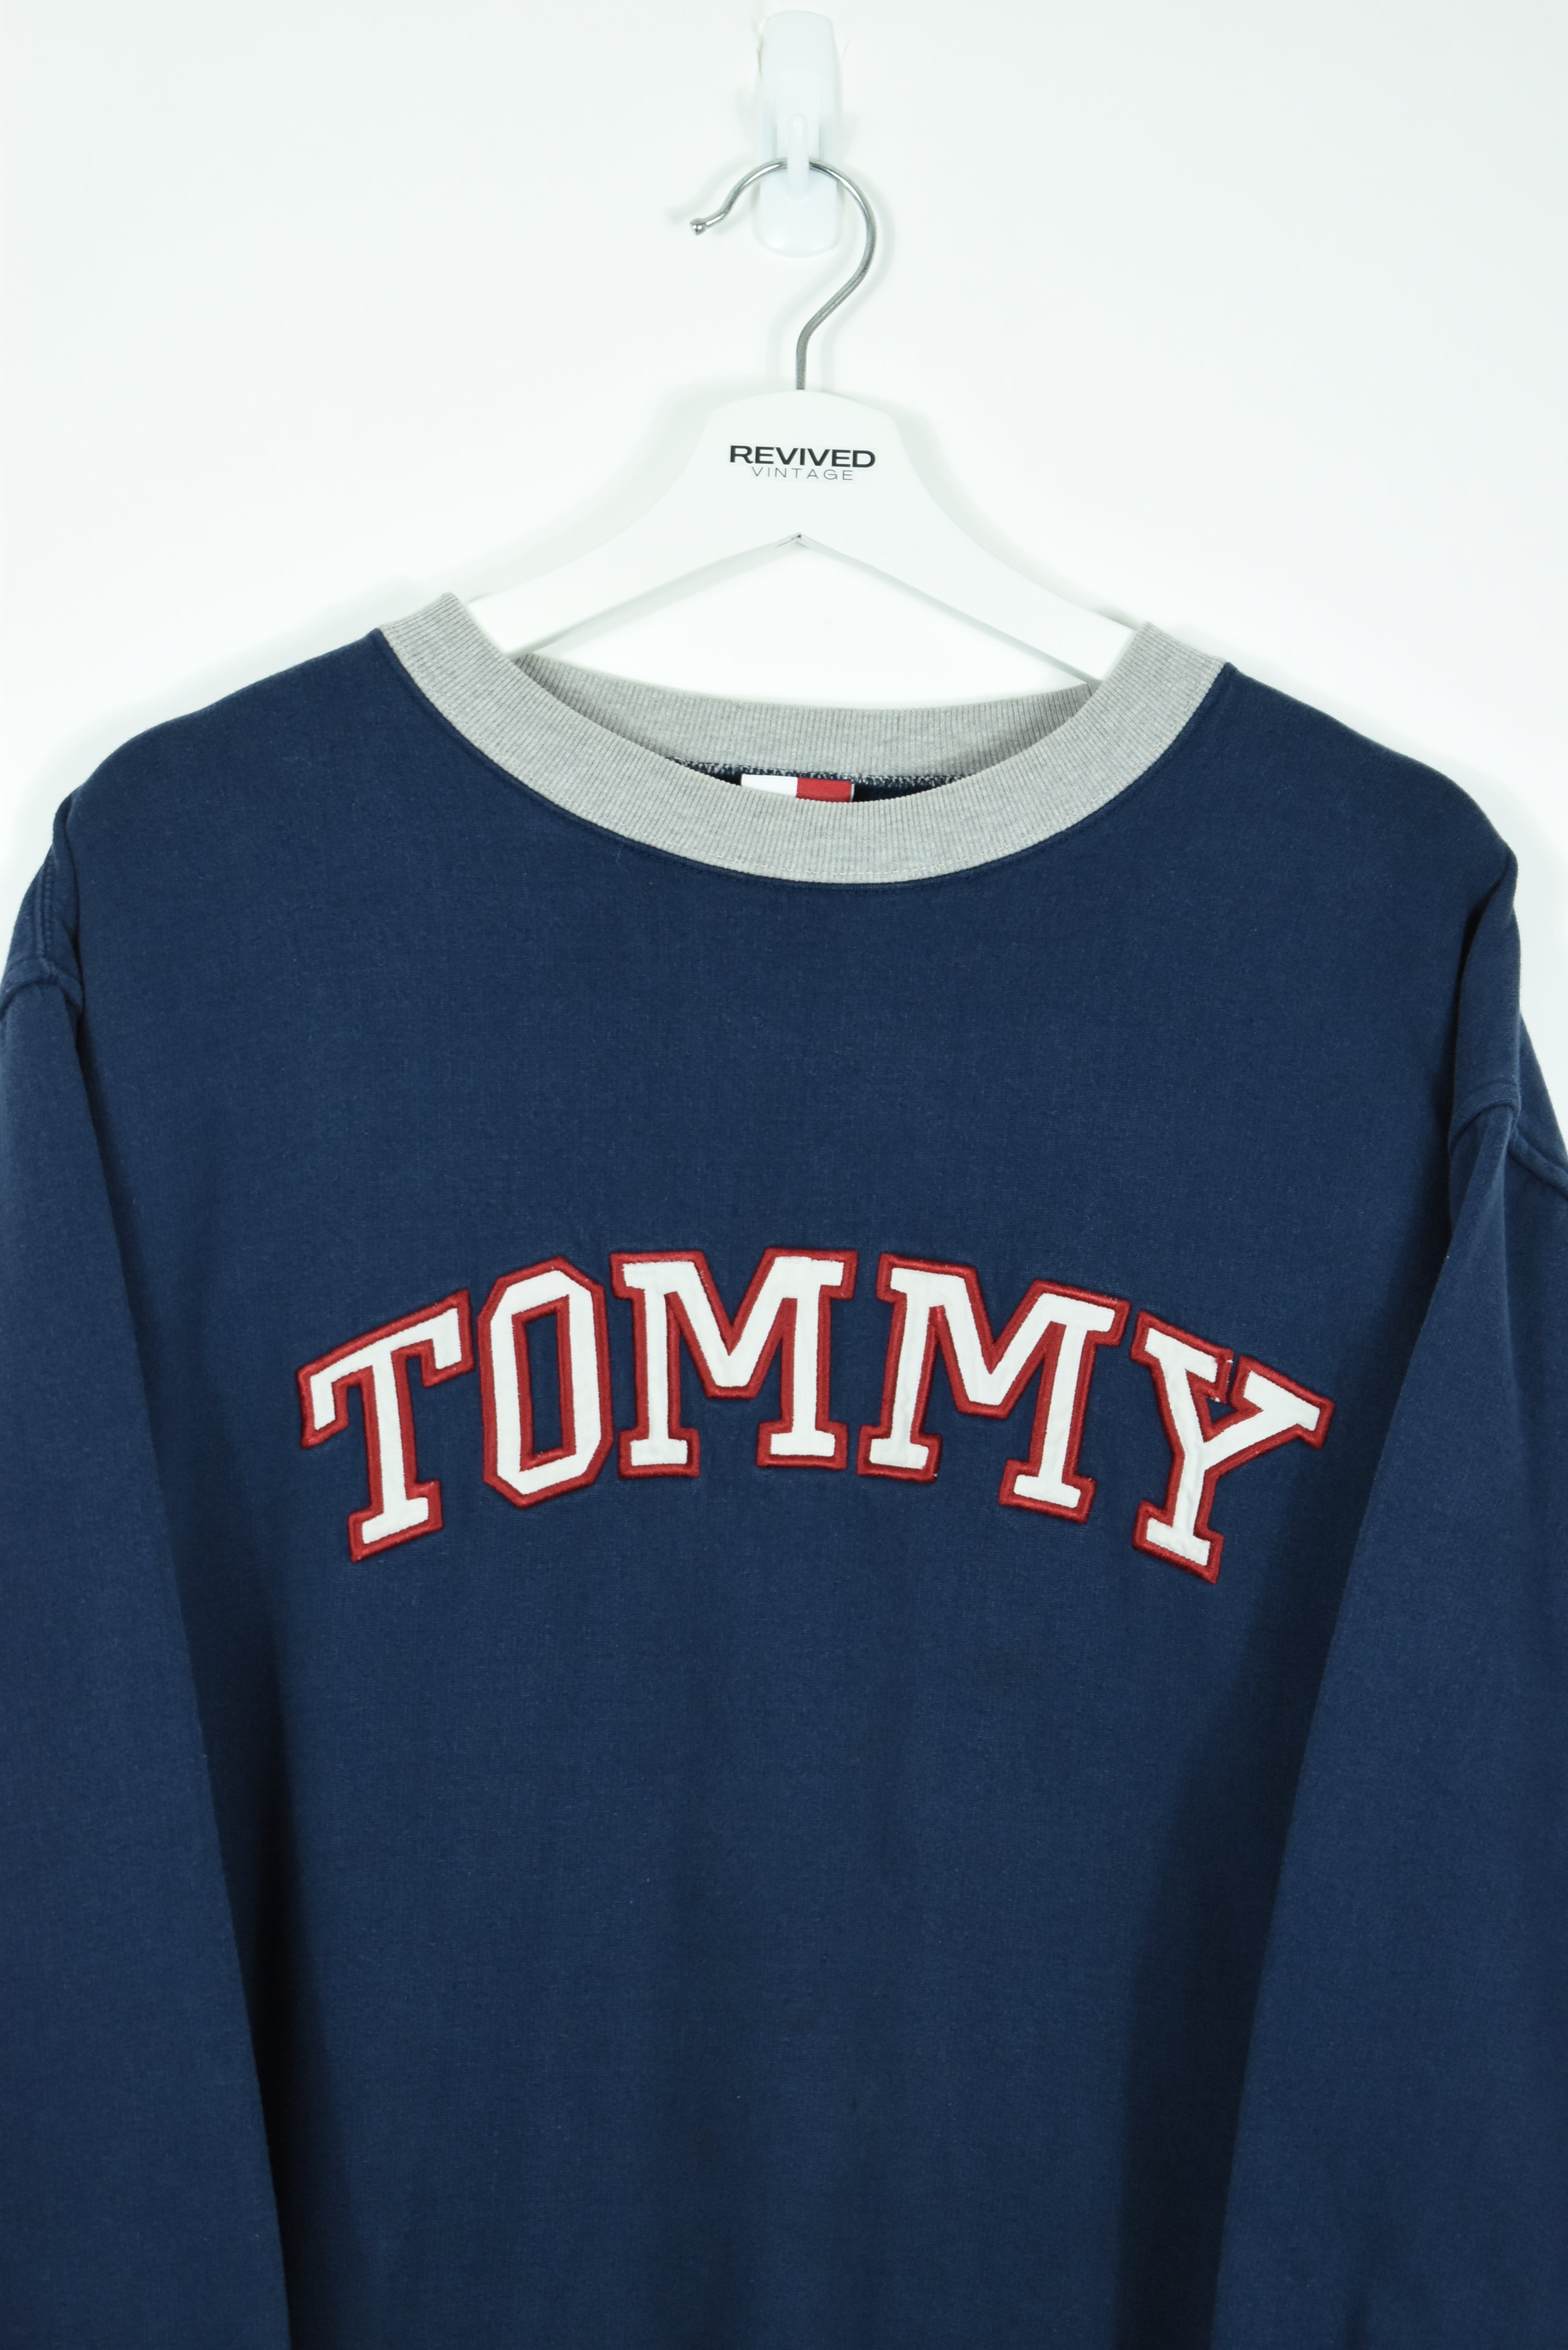 VINTAGE TOMMY HILFIGER EMBROIDERY DOUBLE SIDED SWEATSHIRT LARGE